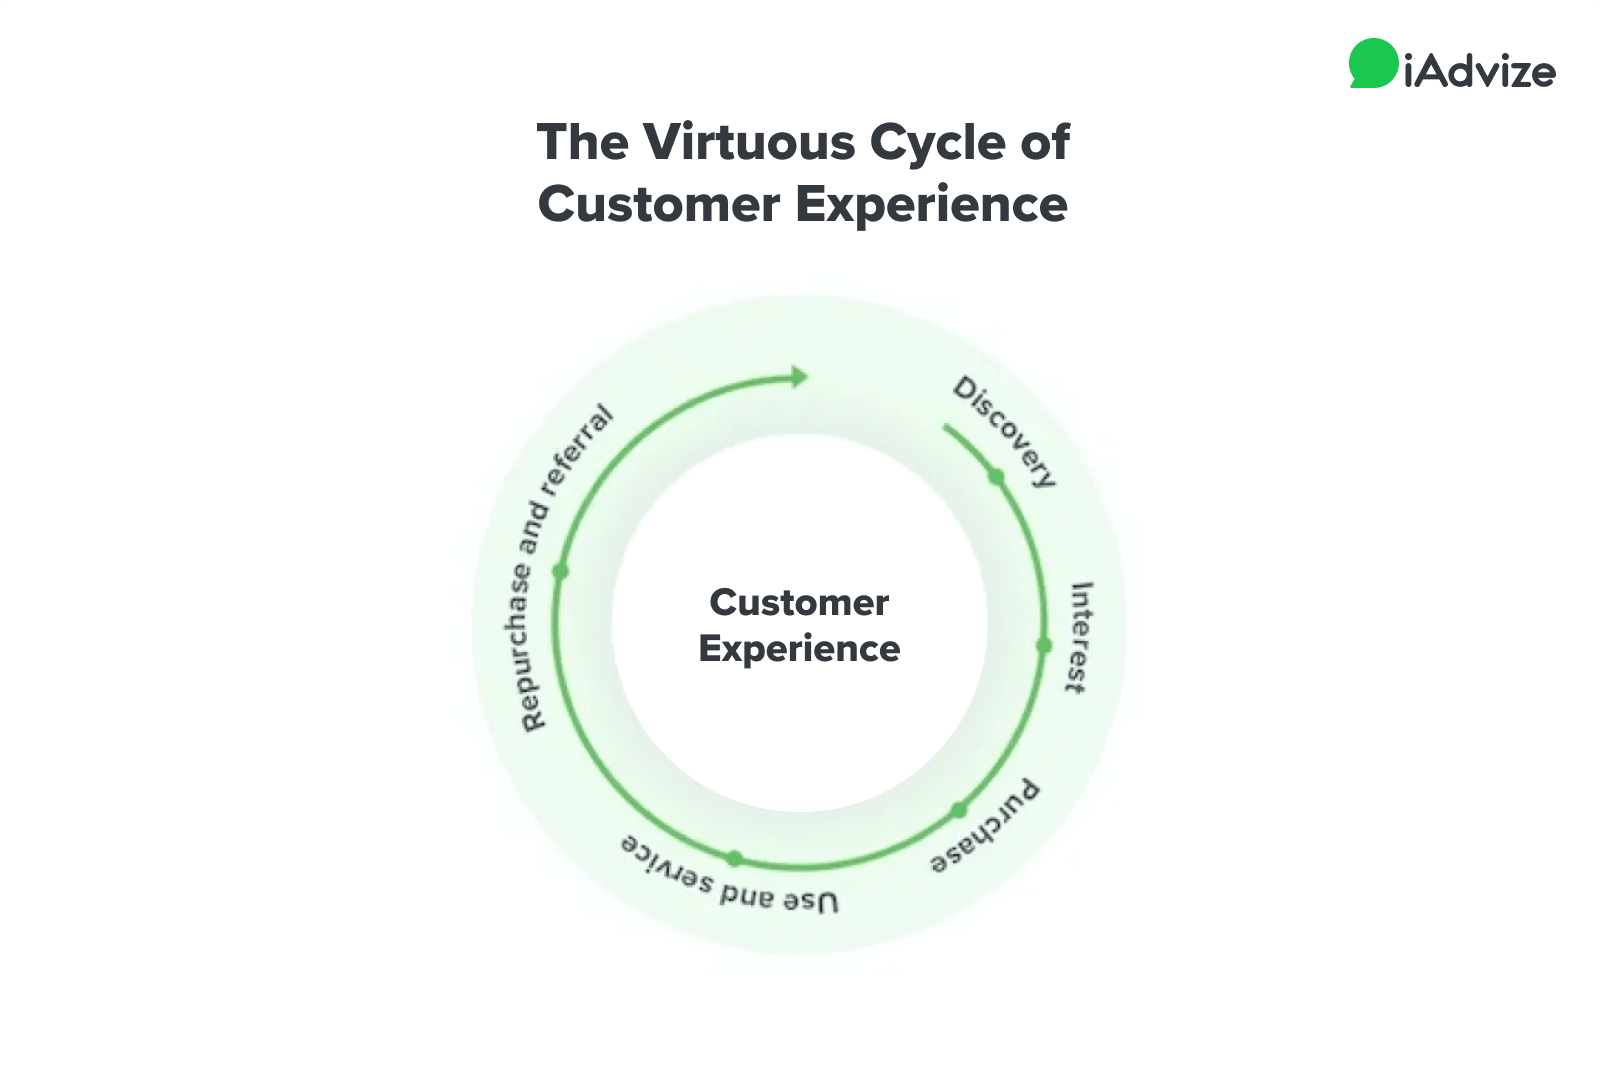 You Can Create a Virtuous Circle of Customer Experience